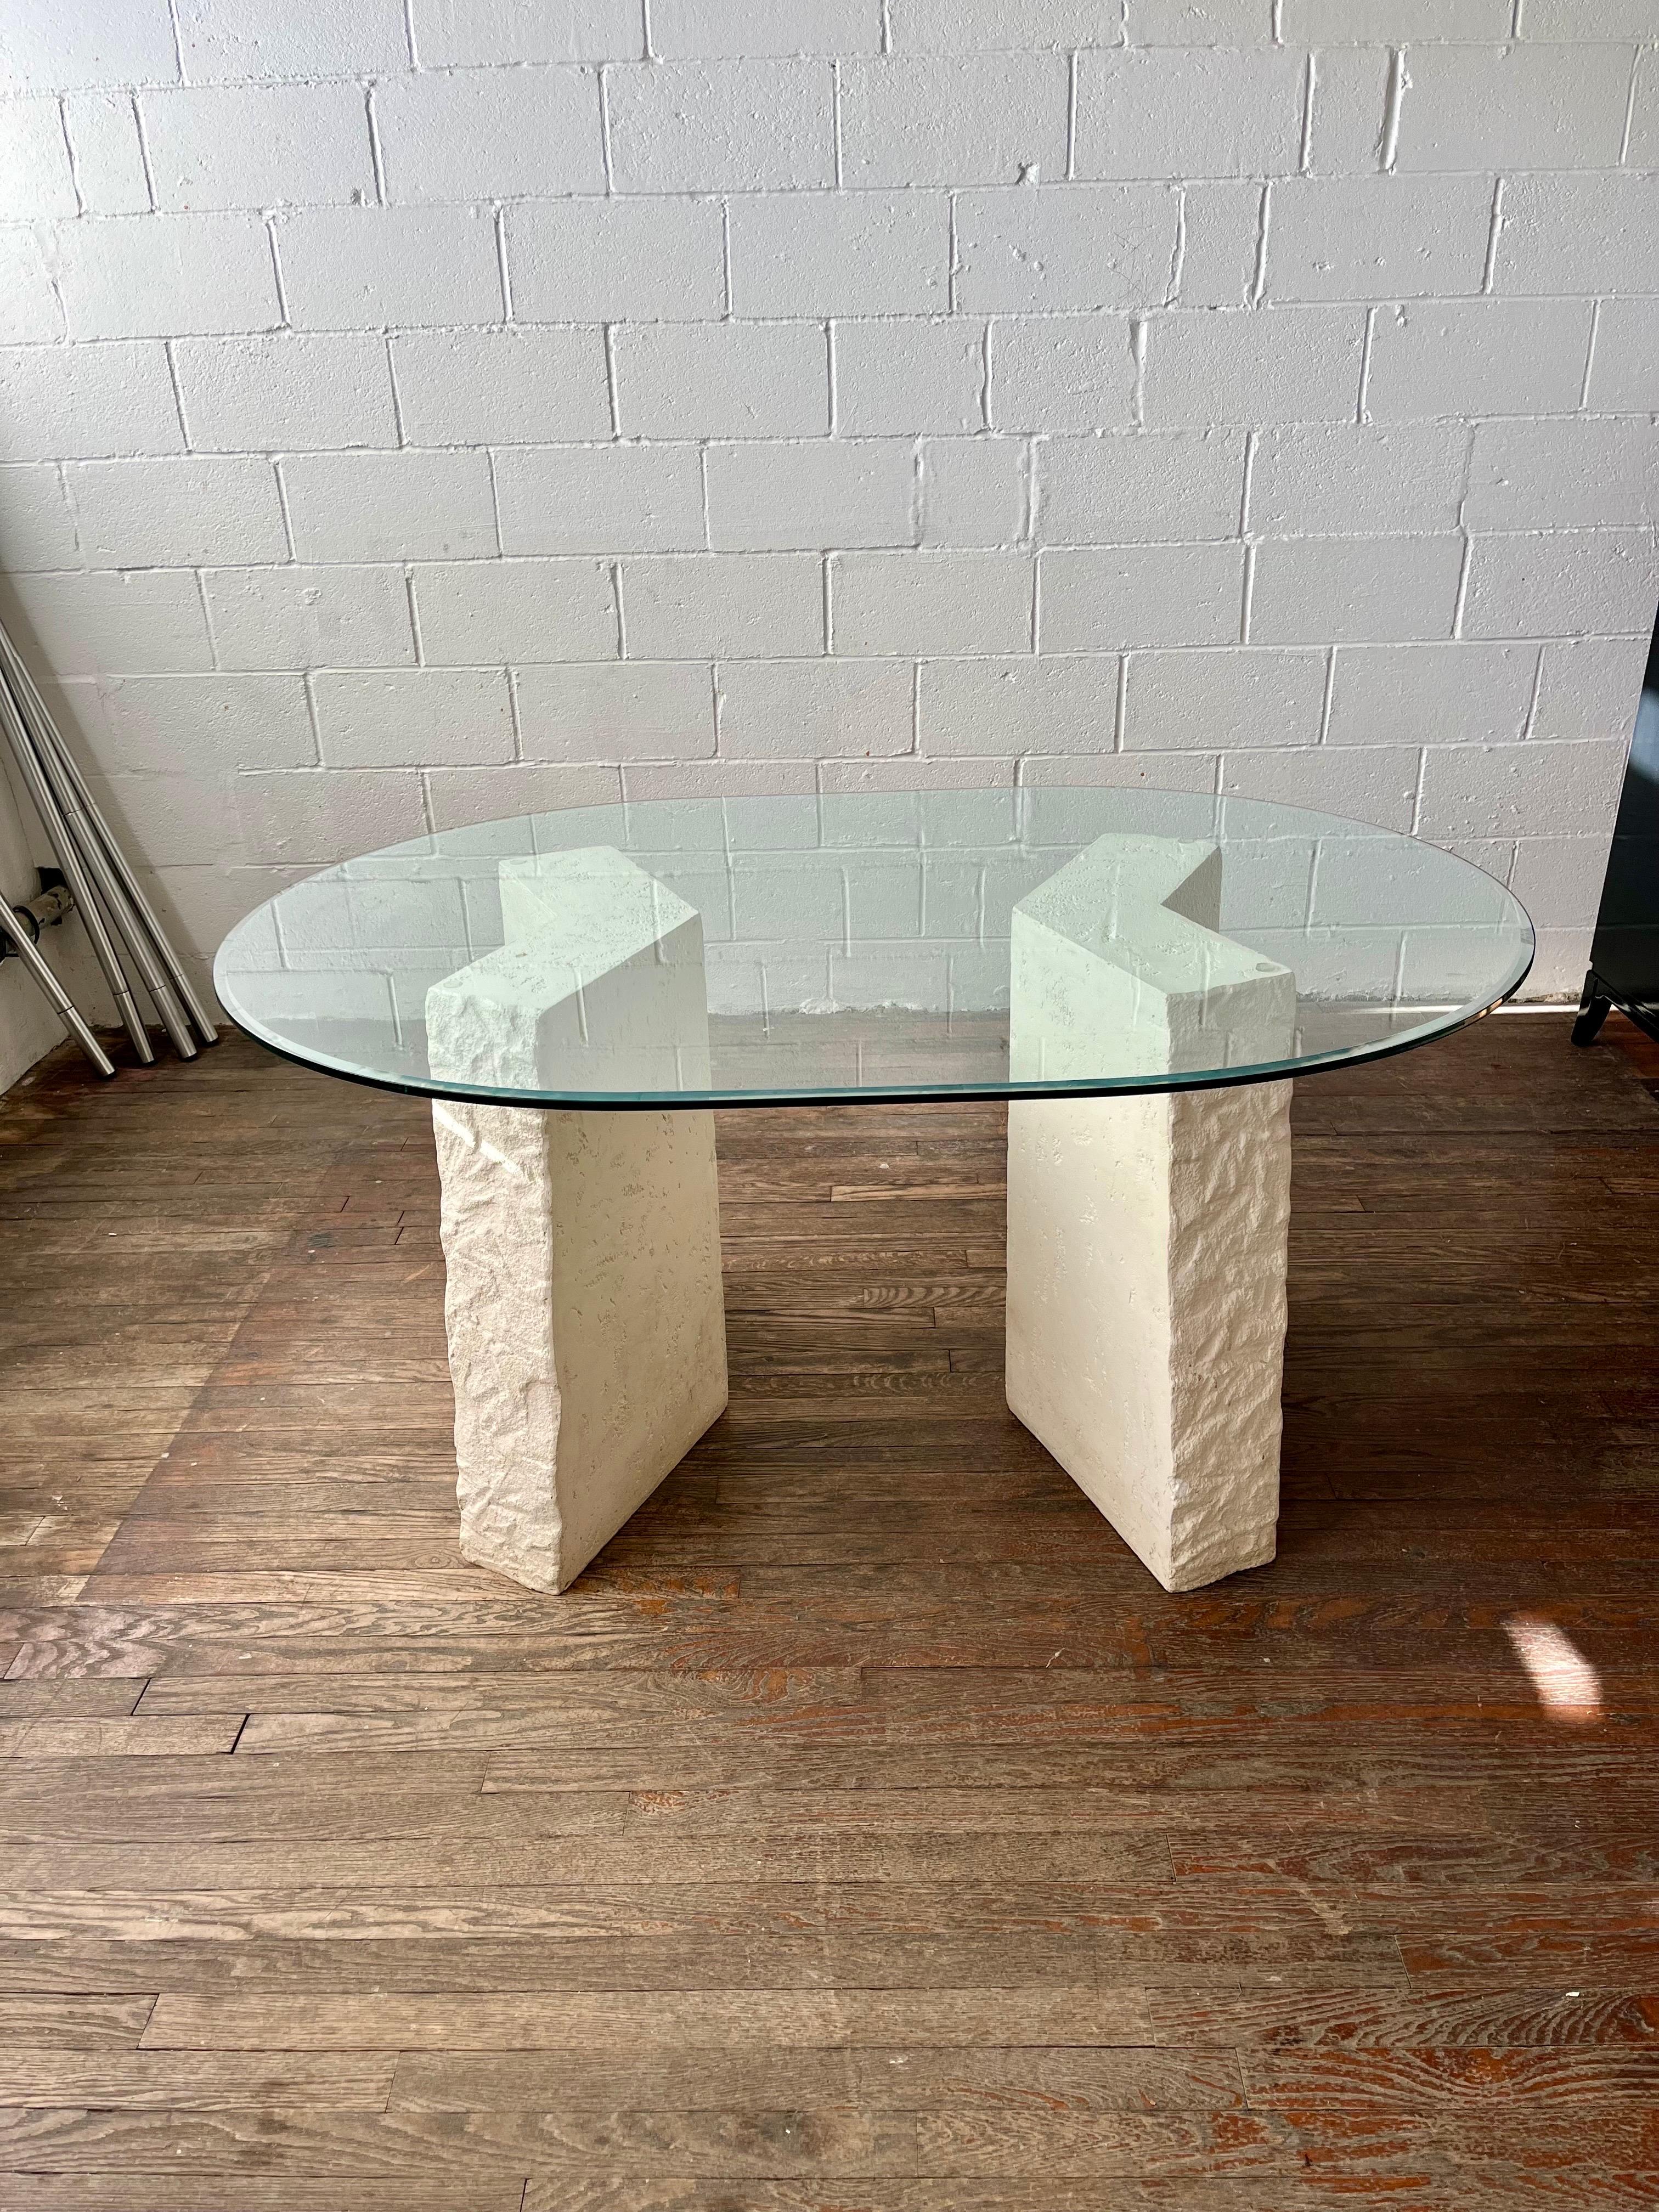 Fantastic sculptural post-modern dining table 2 tapered geometric V shaped base legs. Thick beveled oval glass top. Design in the style of Willy Rizzo.
Curbside to NYC/Philly $400(will need muscle due to weight)